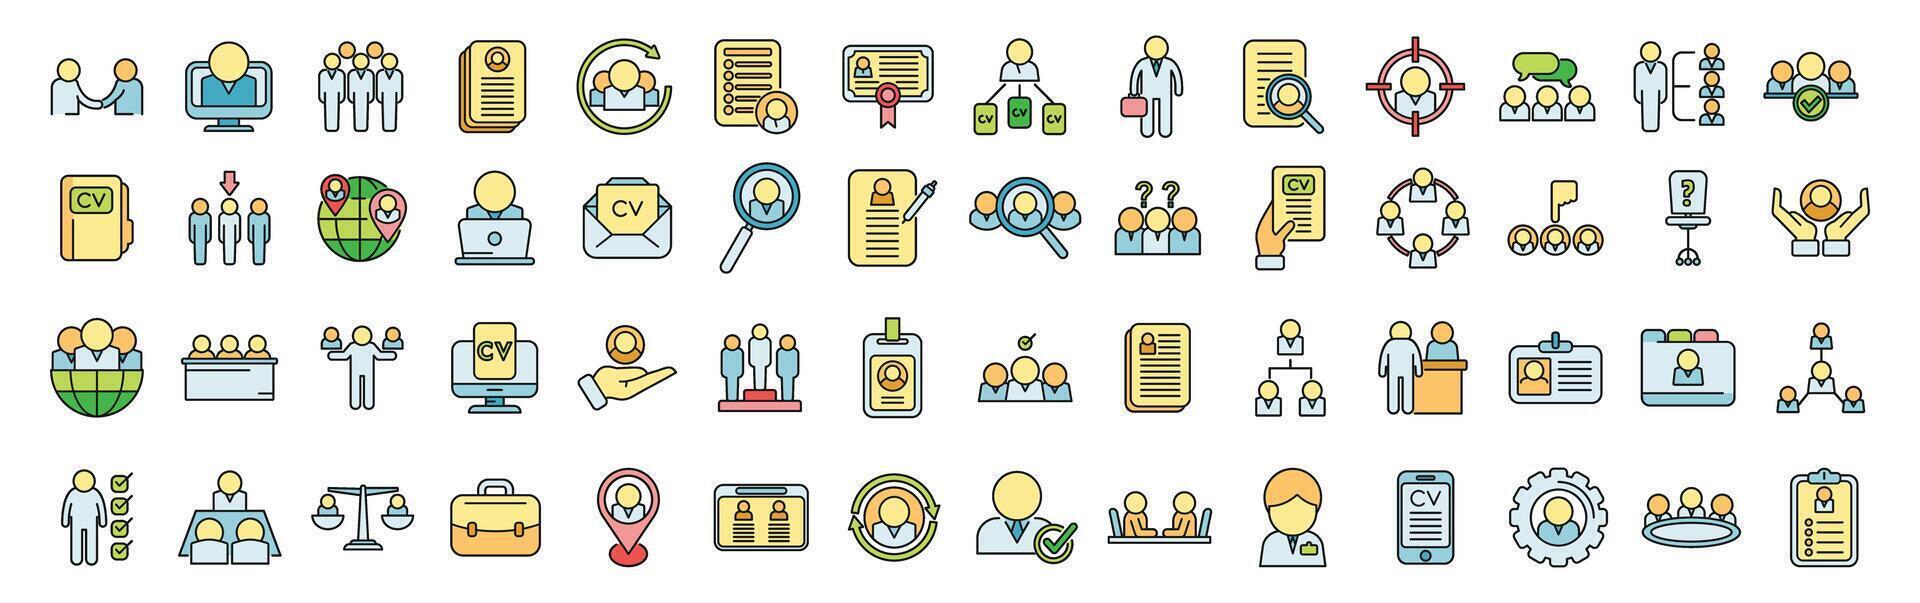 Human resources icons set color line vector